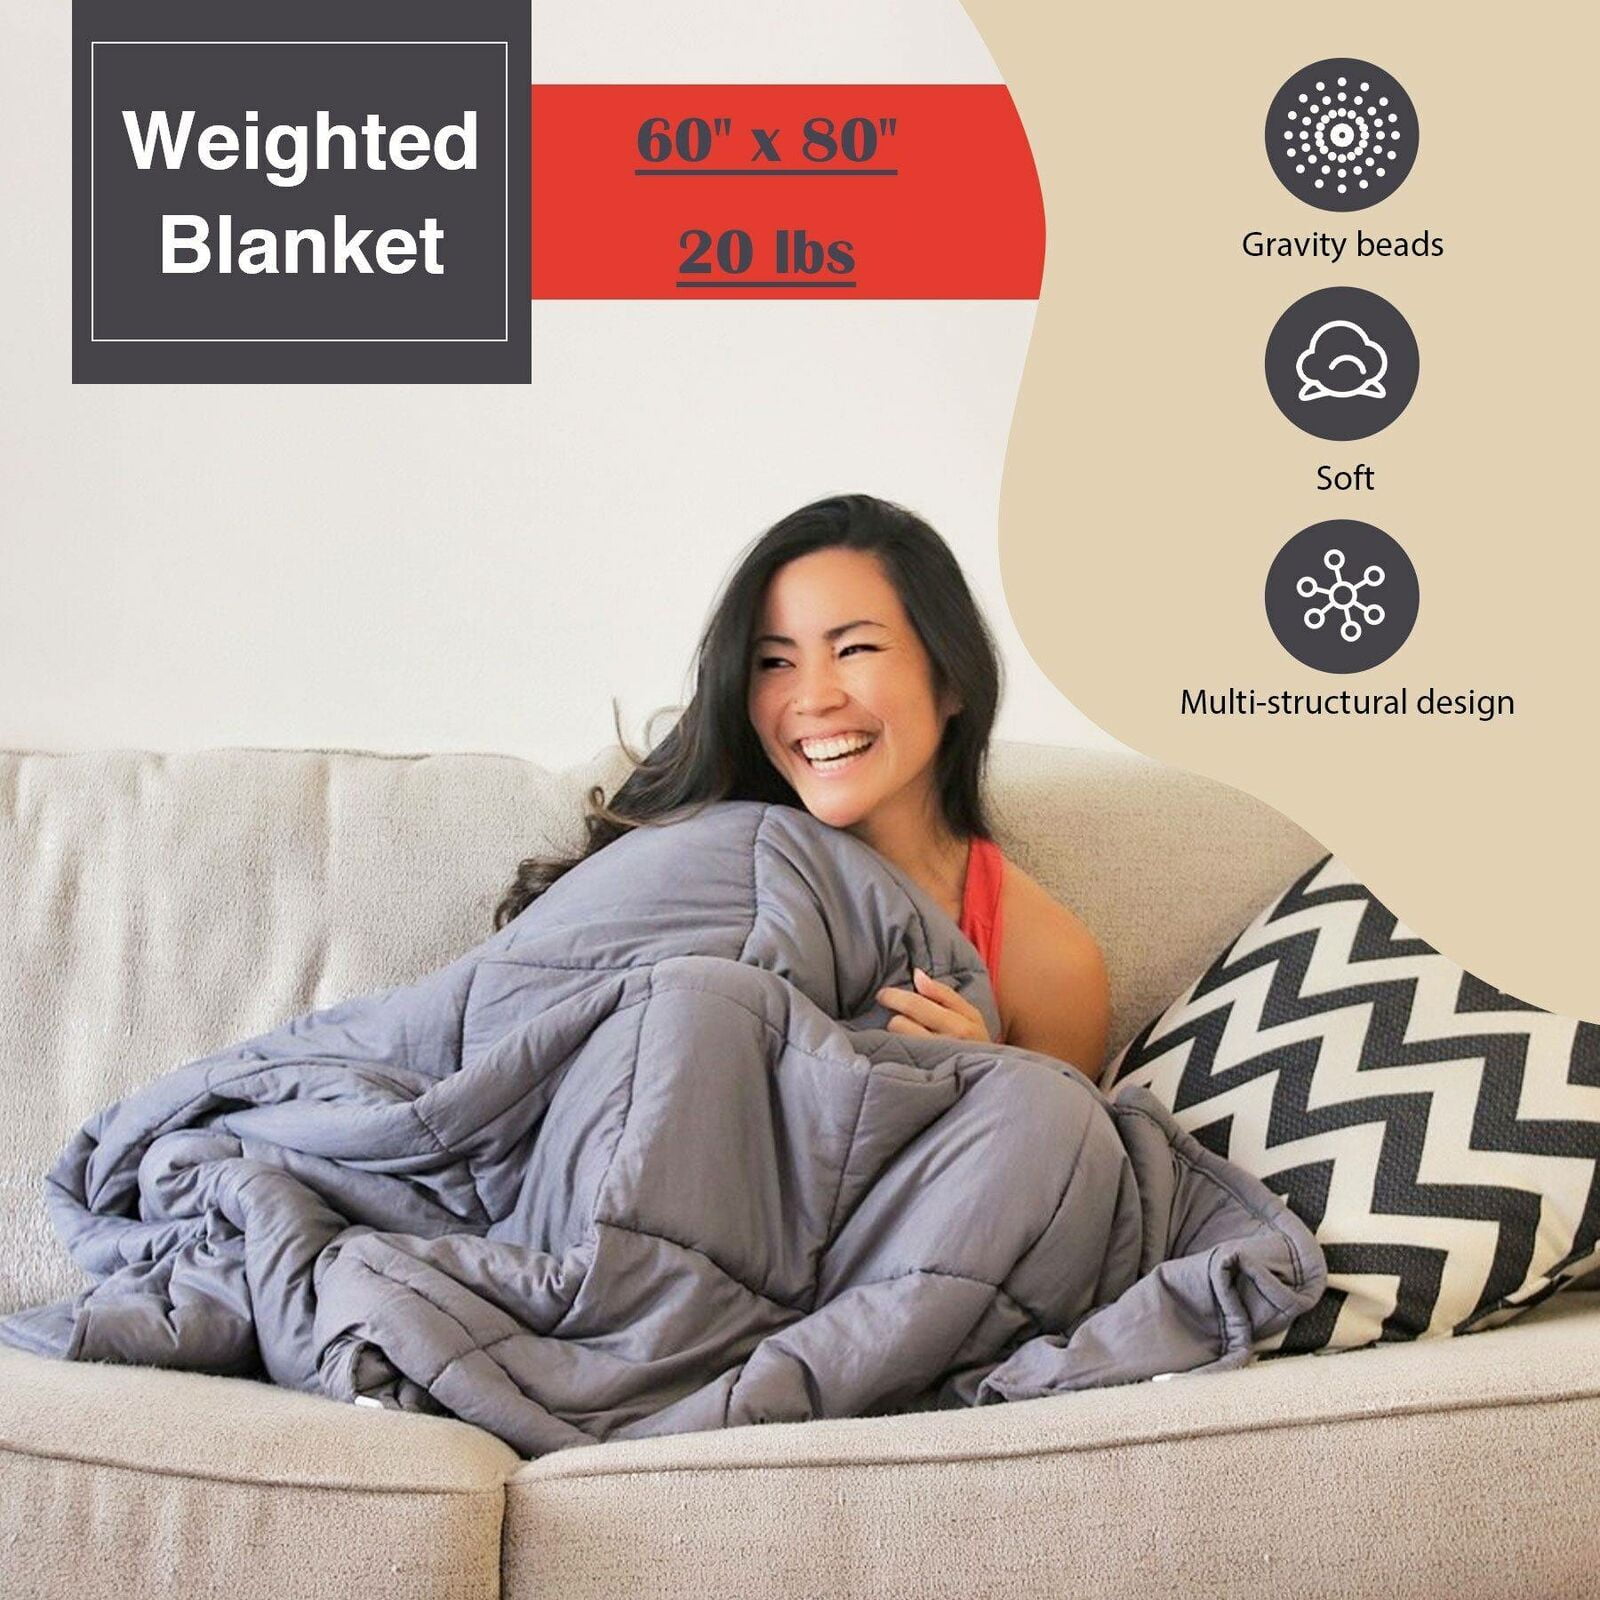 60x80" Weighted Blanket Full Queen Size Reduce Stress 20lb - Walmart